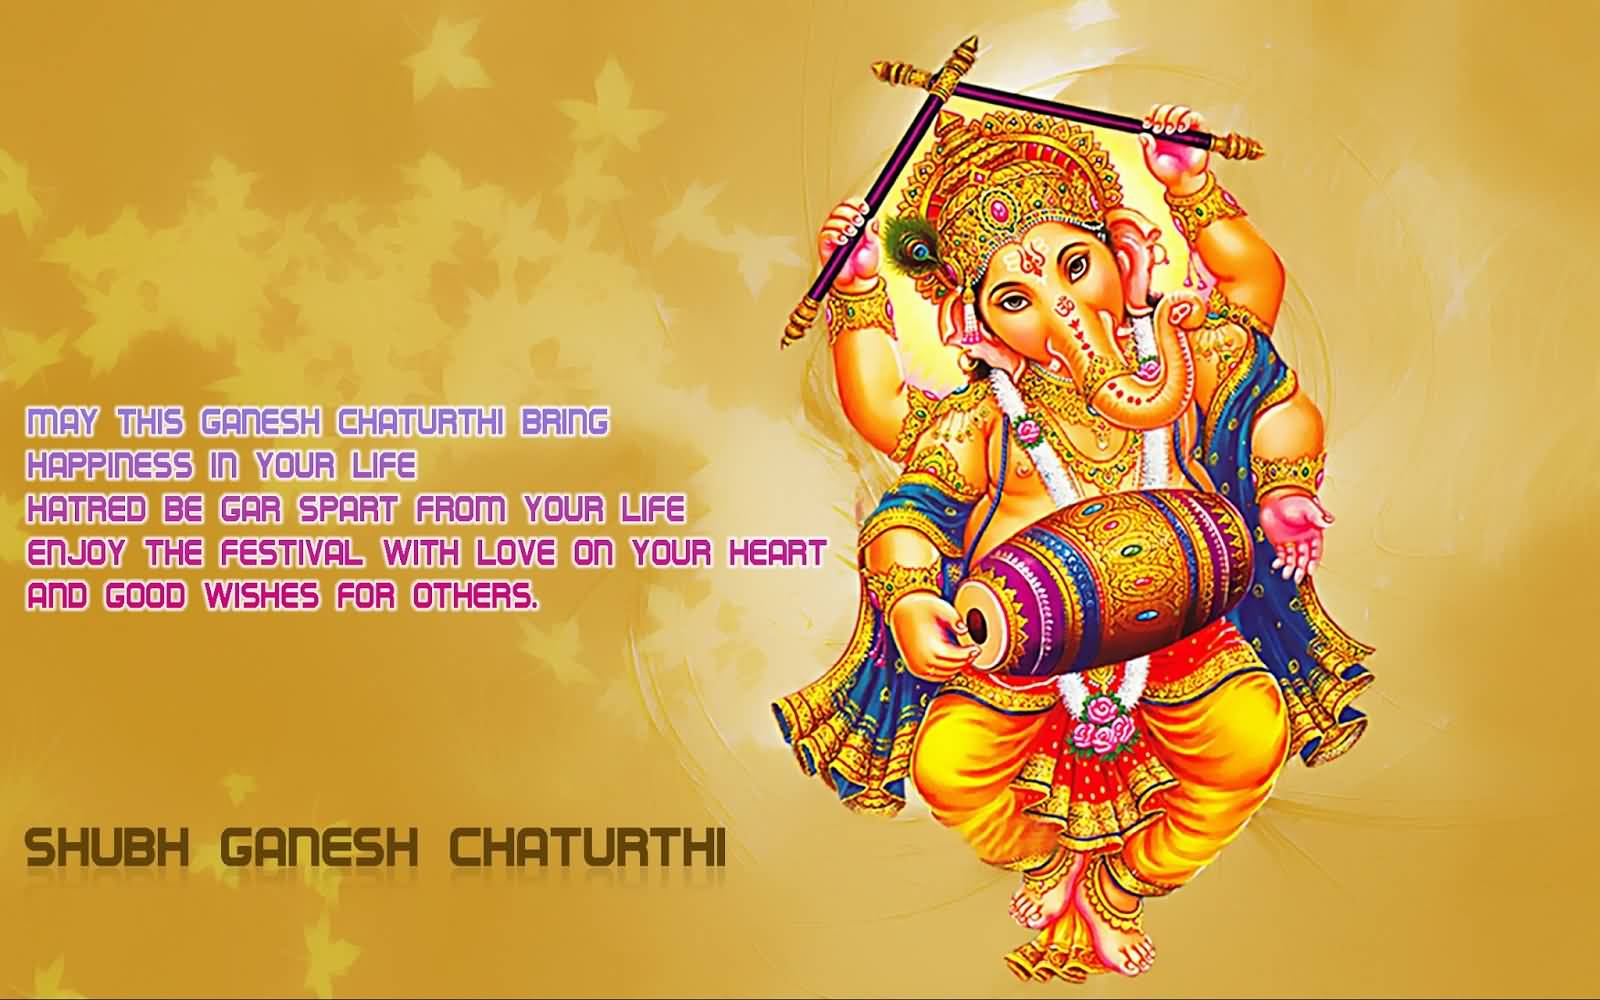 May This Ganesh Chaturthi Bring Happiness In Your Life Happy Ganesh Chaturthi